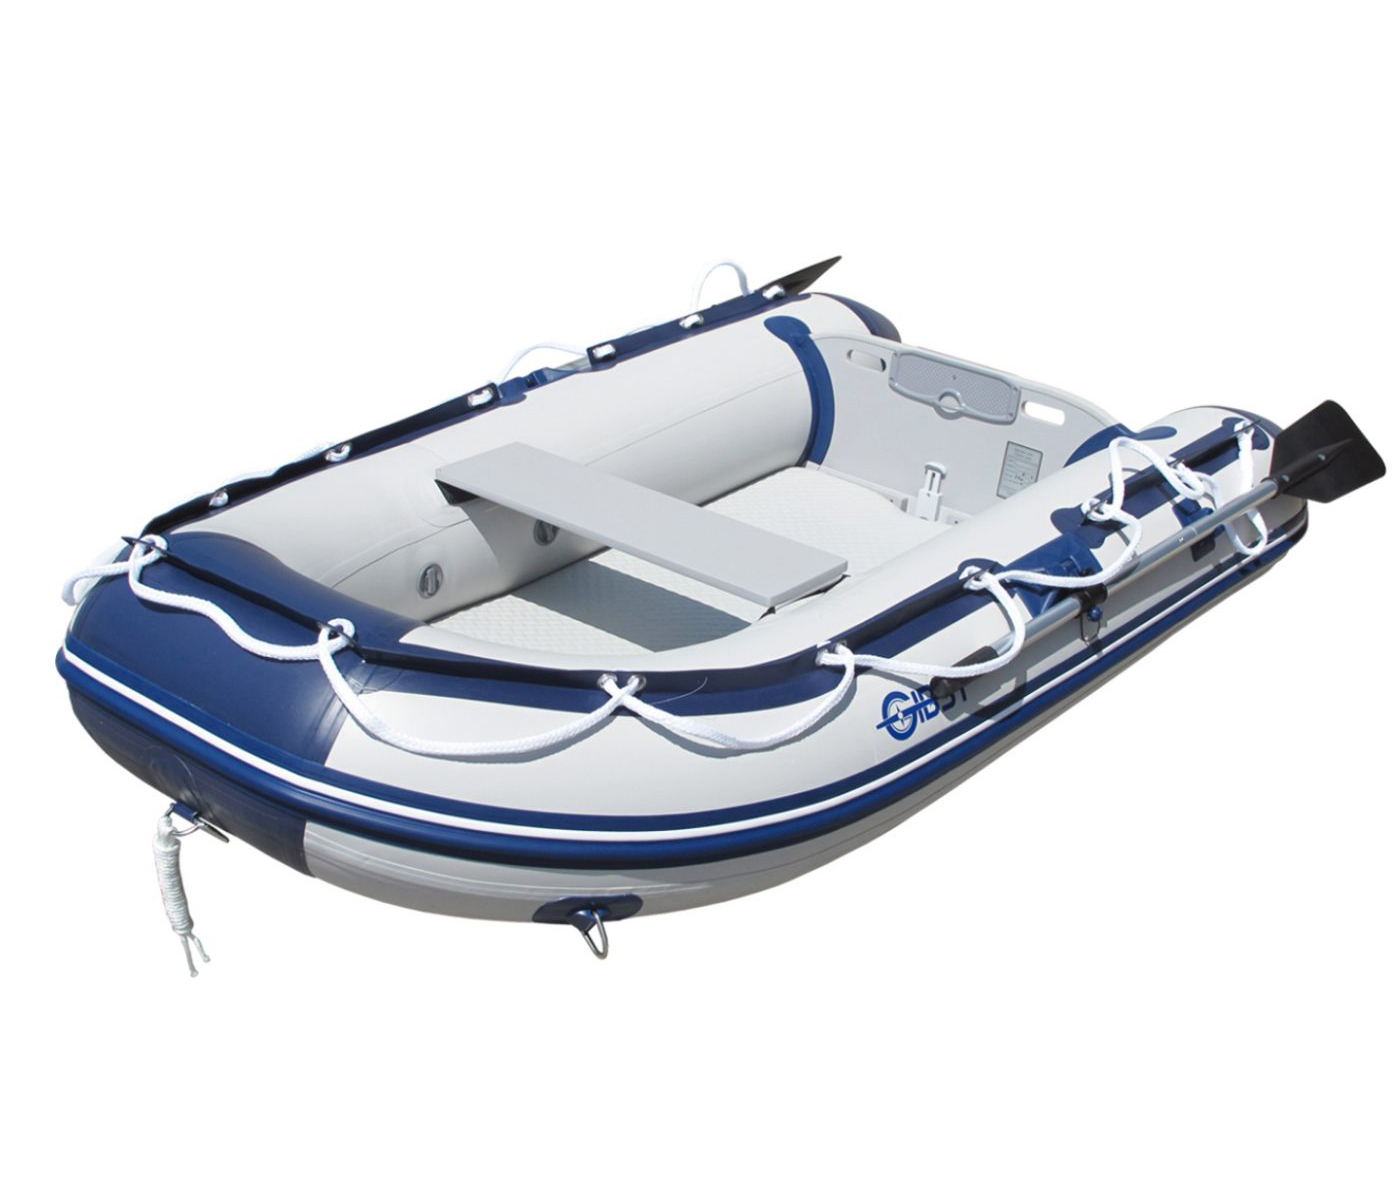 How to Choose a Rubber Dinghy - what to look for when buying